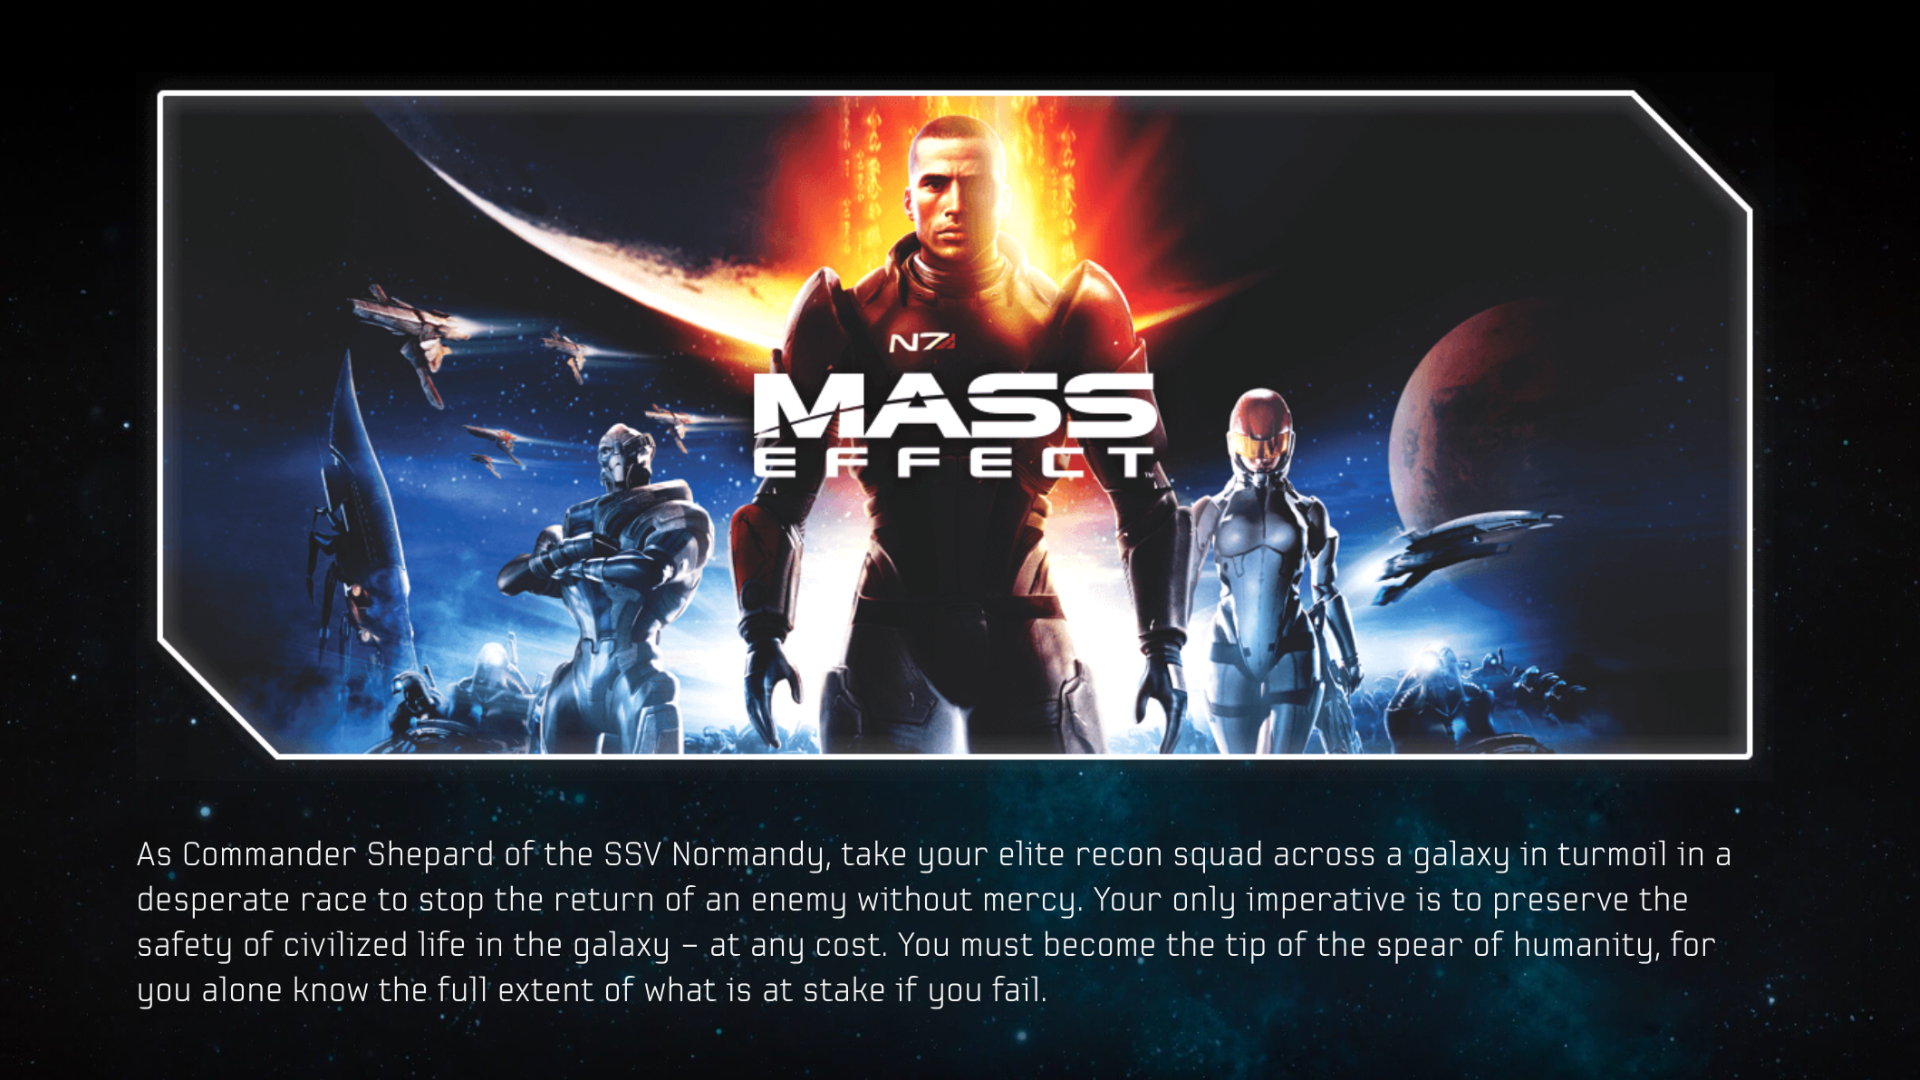 Commander Shepard stands at the center with iconic characters from Mass Effect, against a backdrop of space and the game's logo